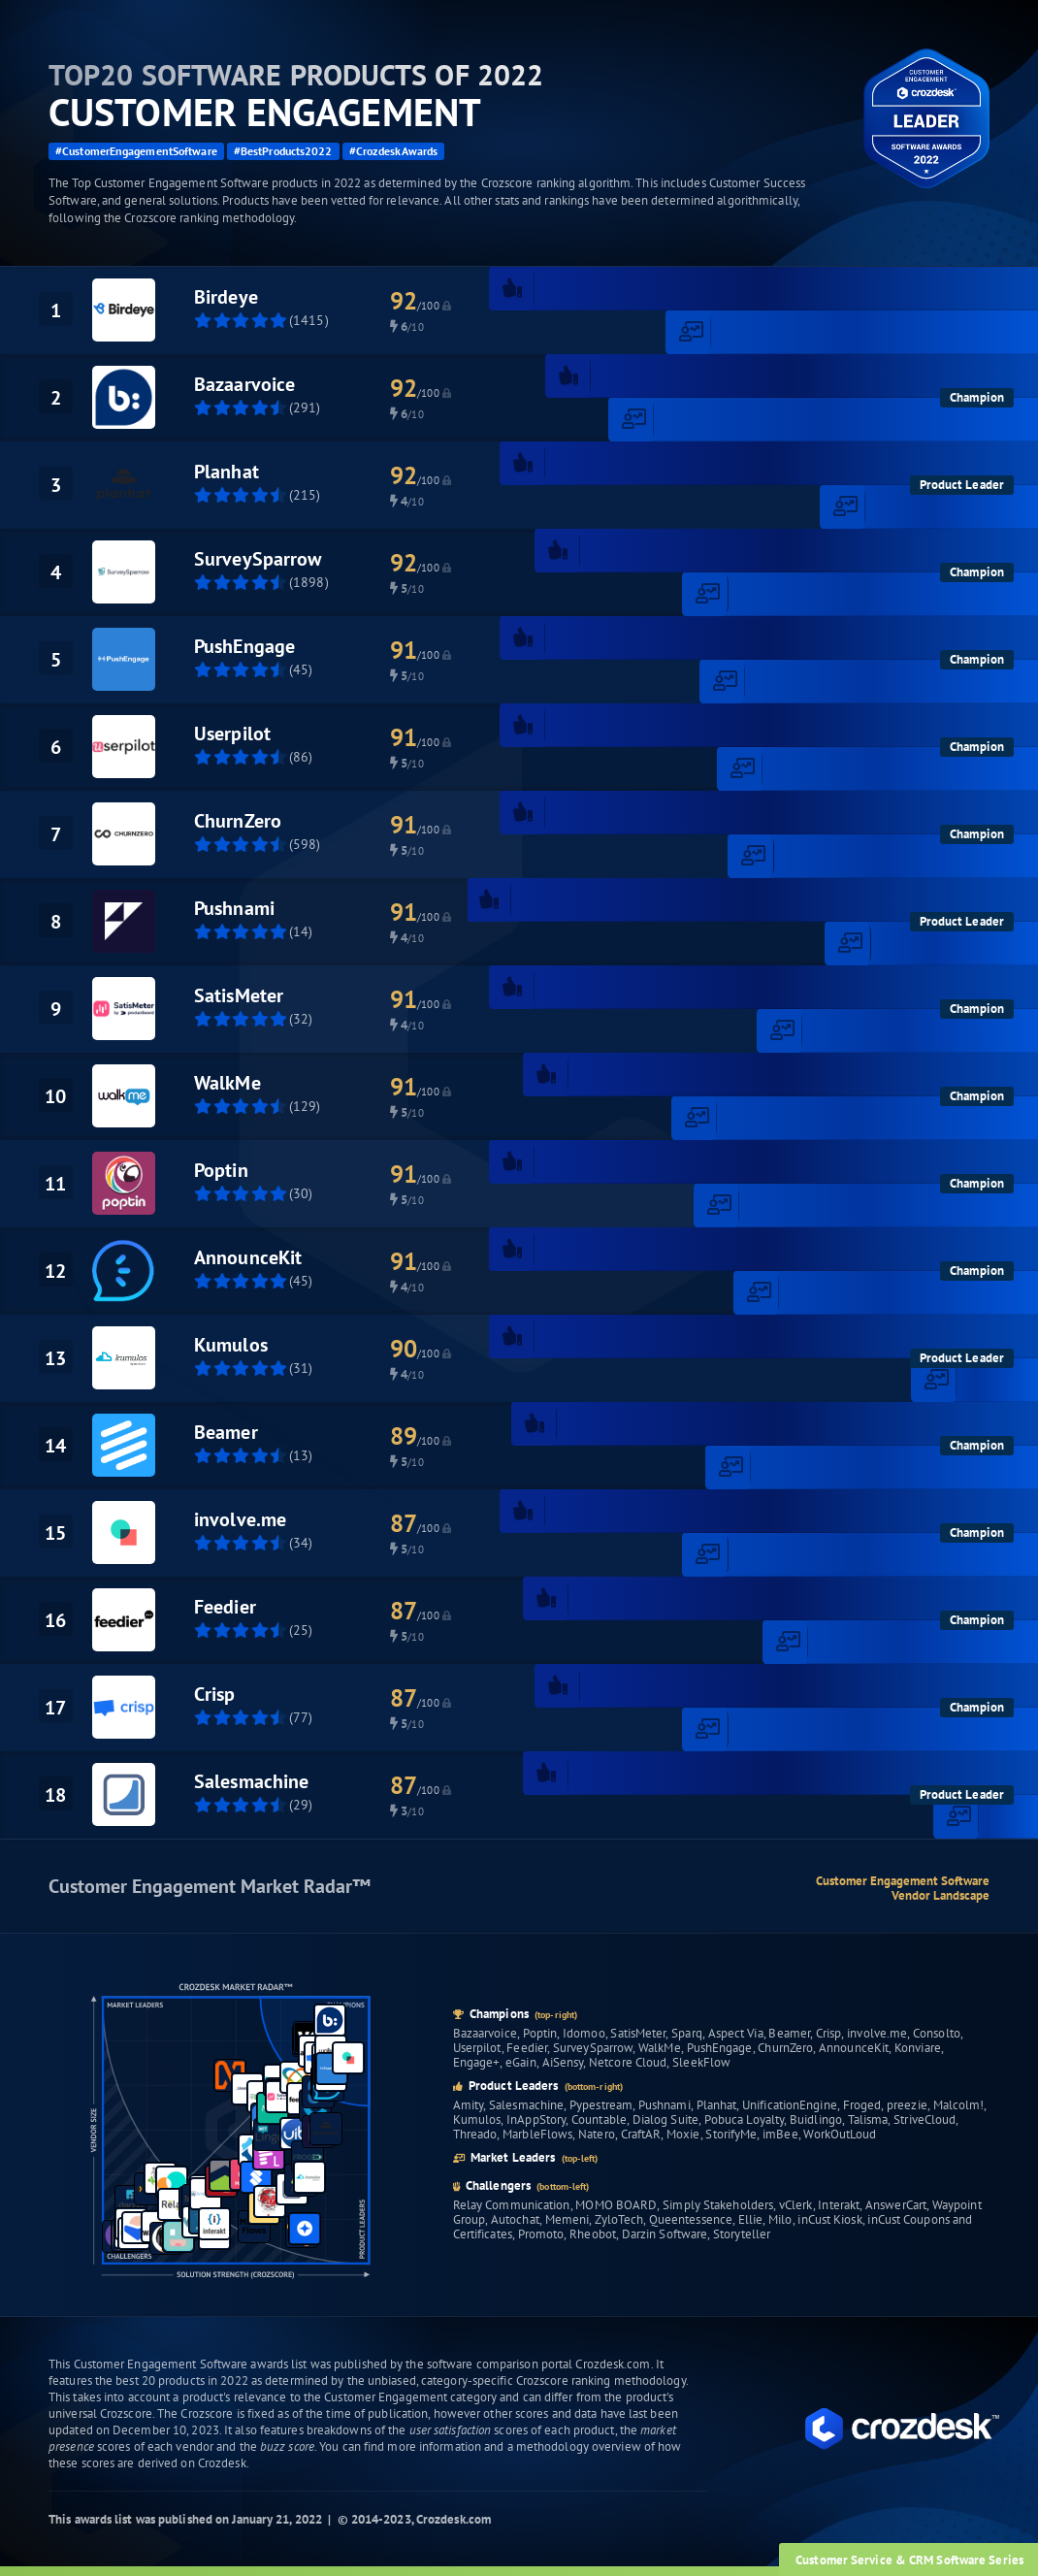 Top 20 Customer Engagement Software of 2022 Infographic